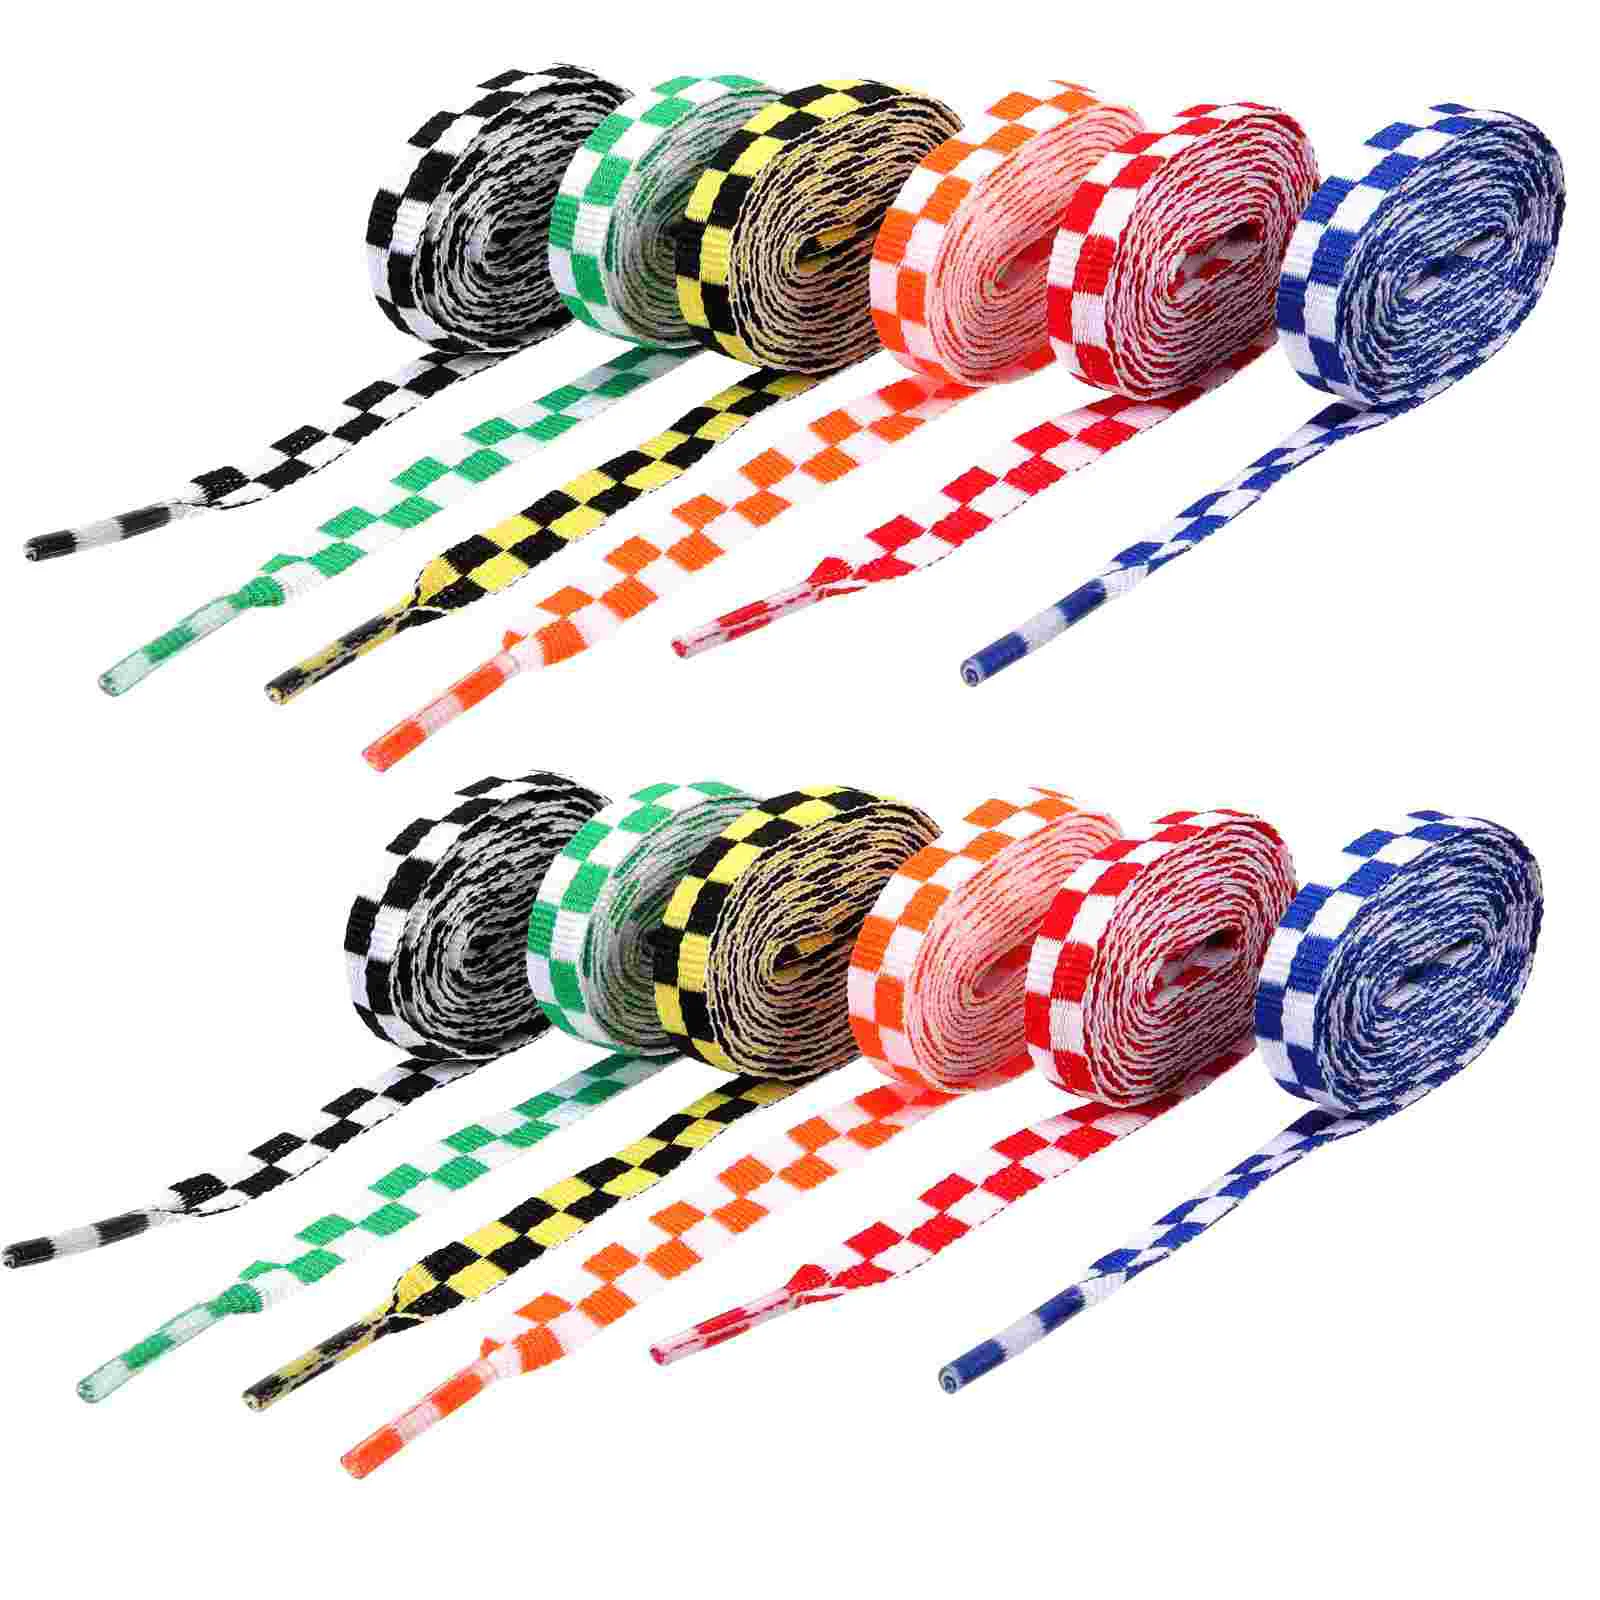 12 Pairs Shoelace Laces Replacement Sports Polyester High Density Shoestring Reusable Circular